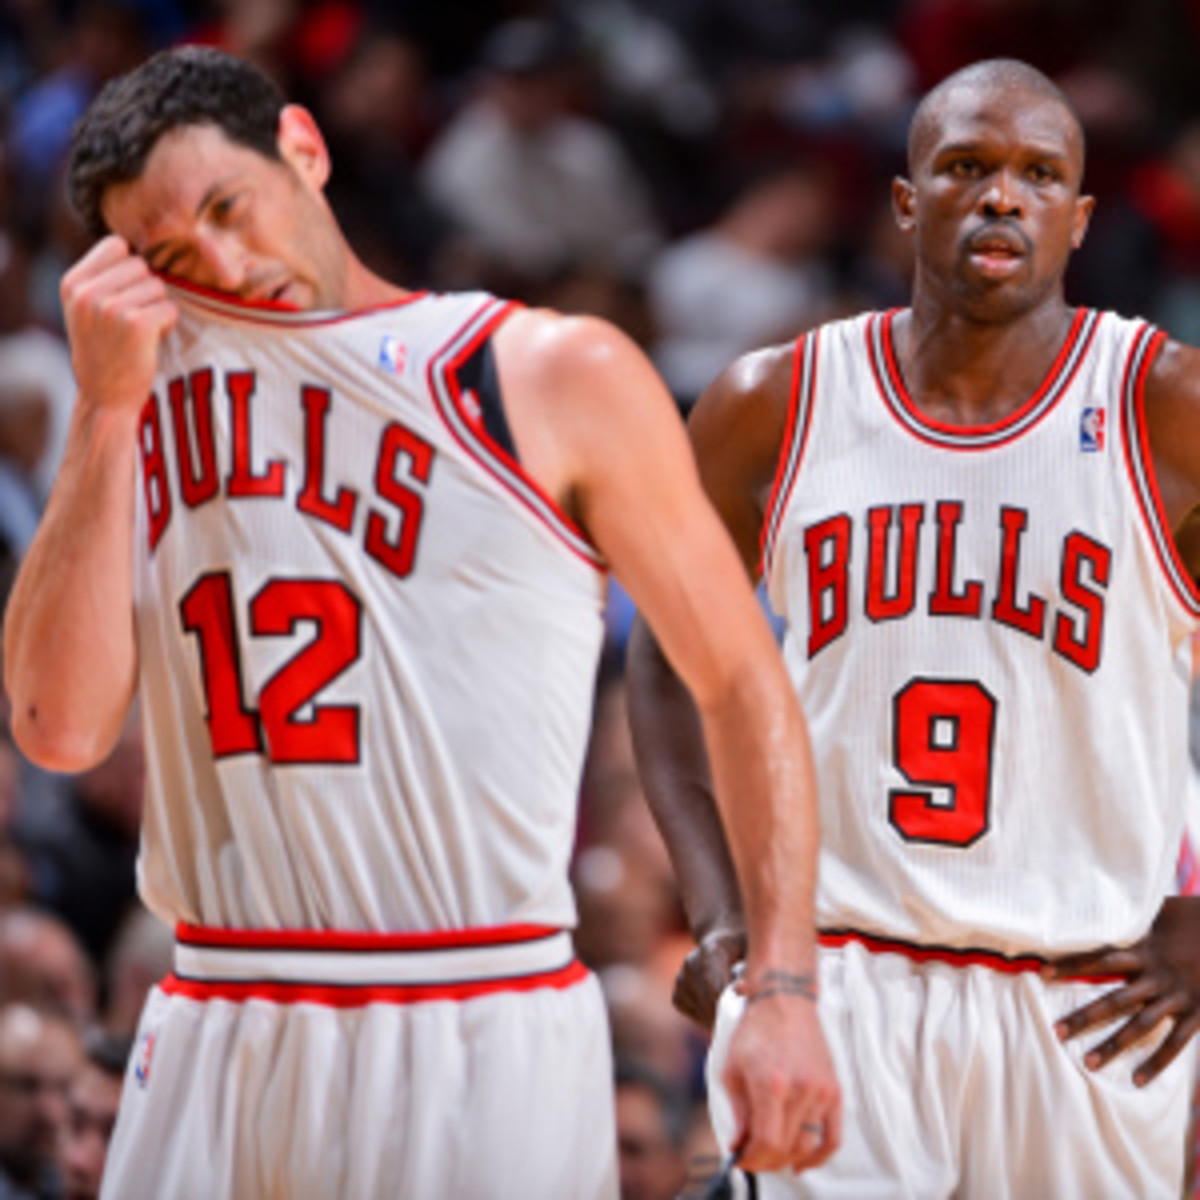 The Bulls with likely be without Luol Deng and Kirk Hinrich again Wednesday night. (Jesse D. Garrabrant/Getty Images)